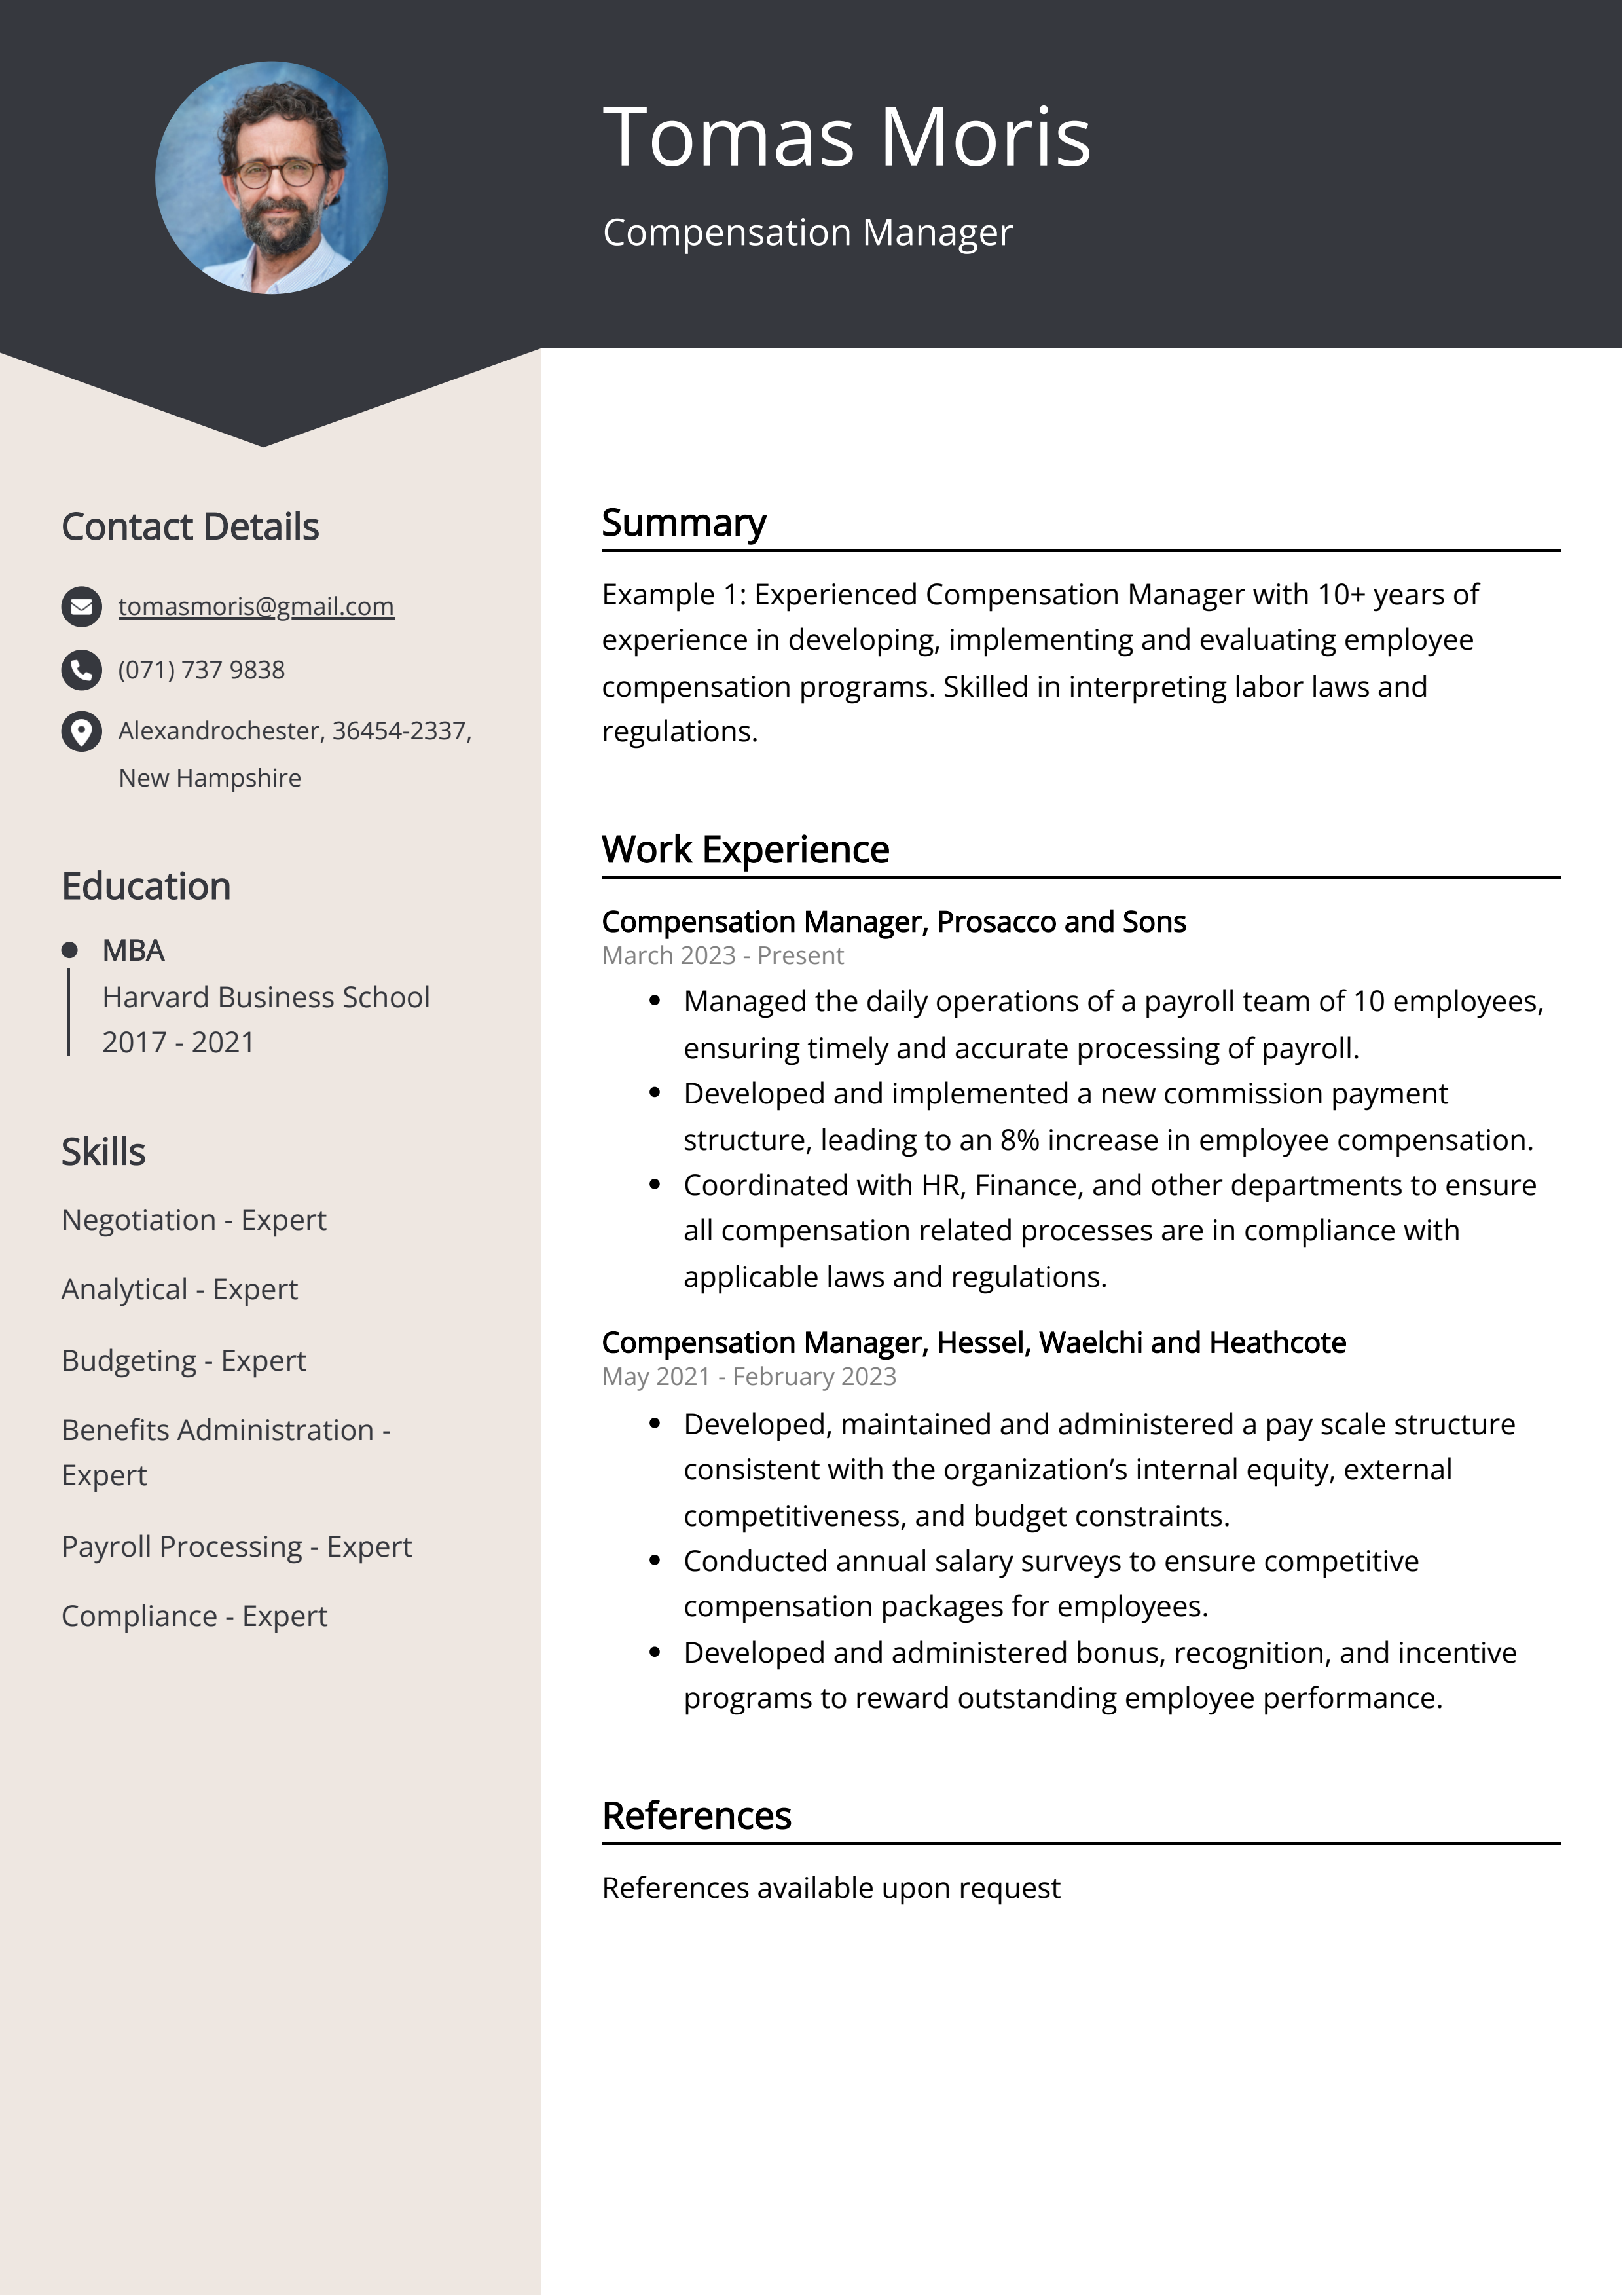 Compensation Manager CV Example